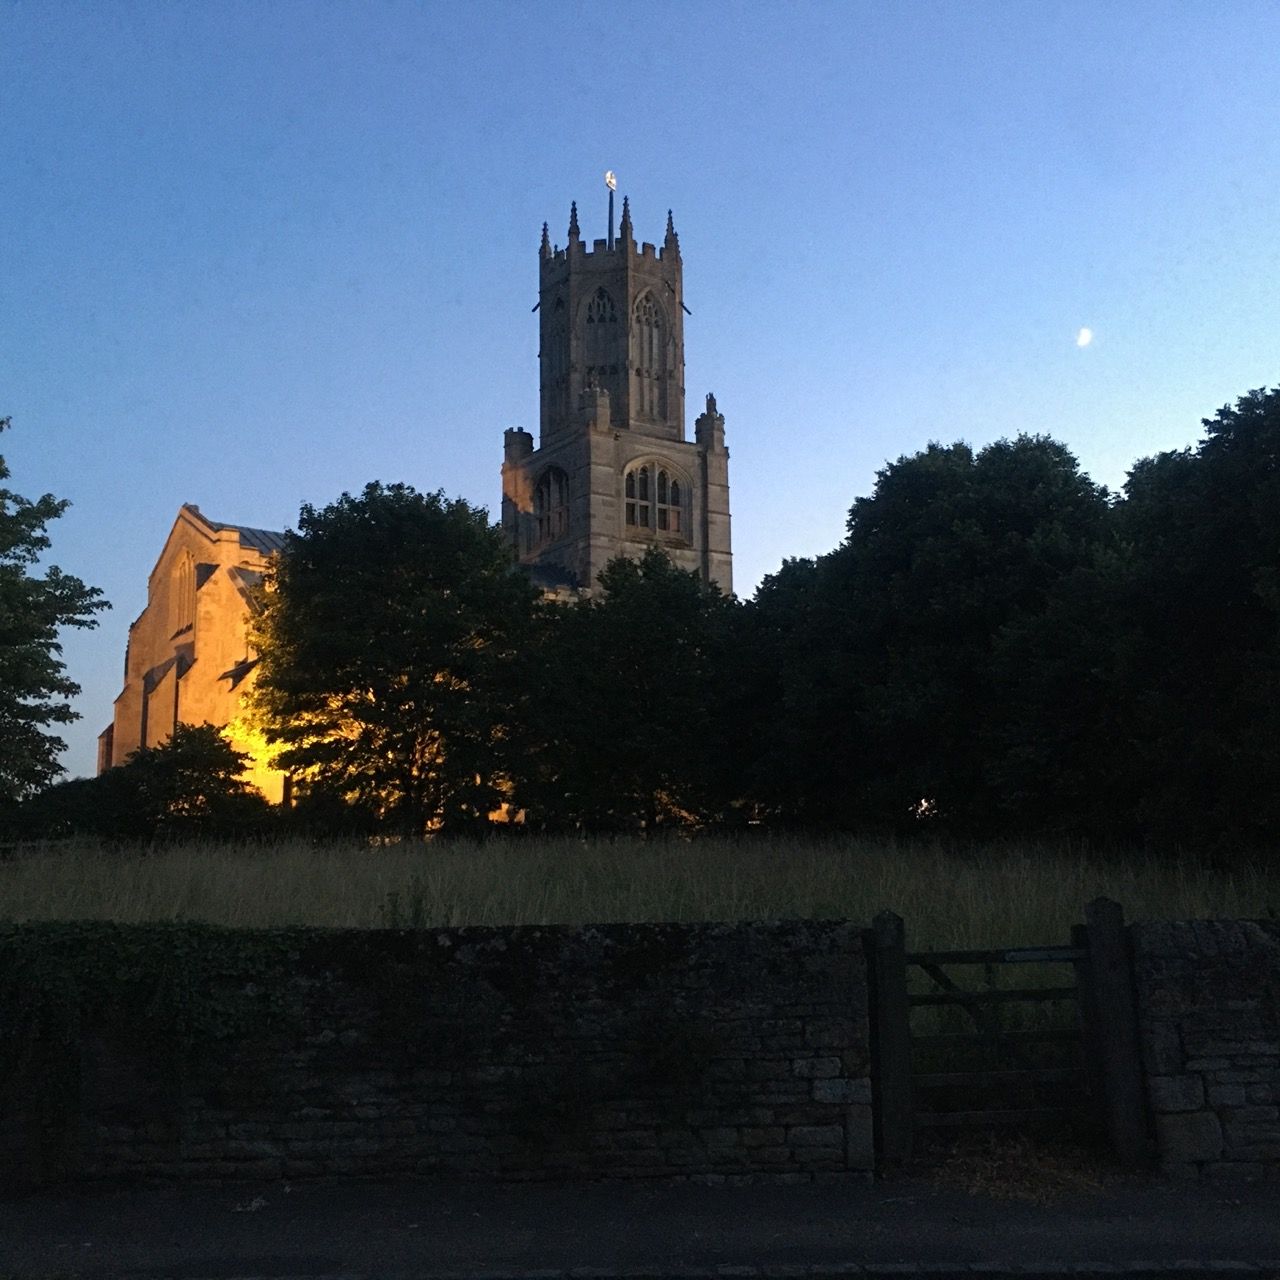 St Mary and moon